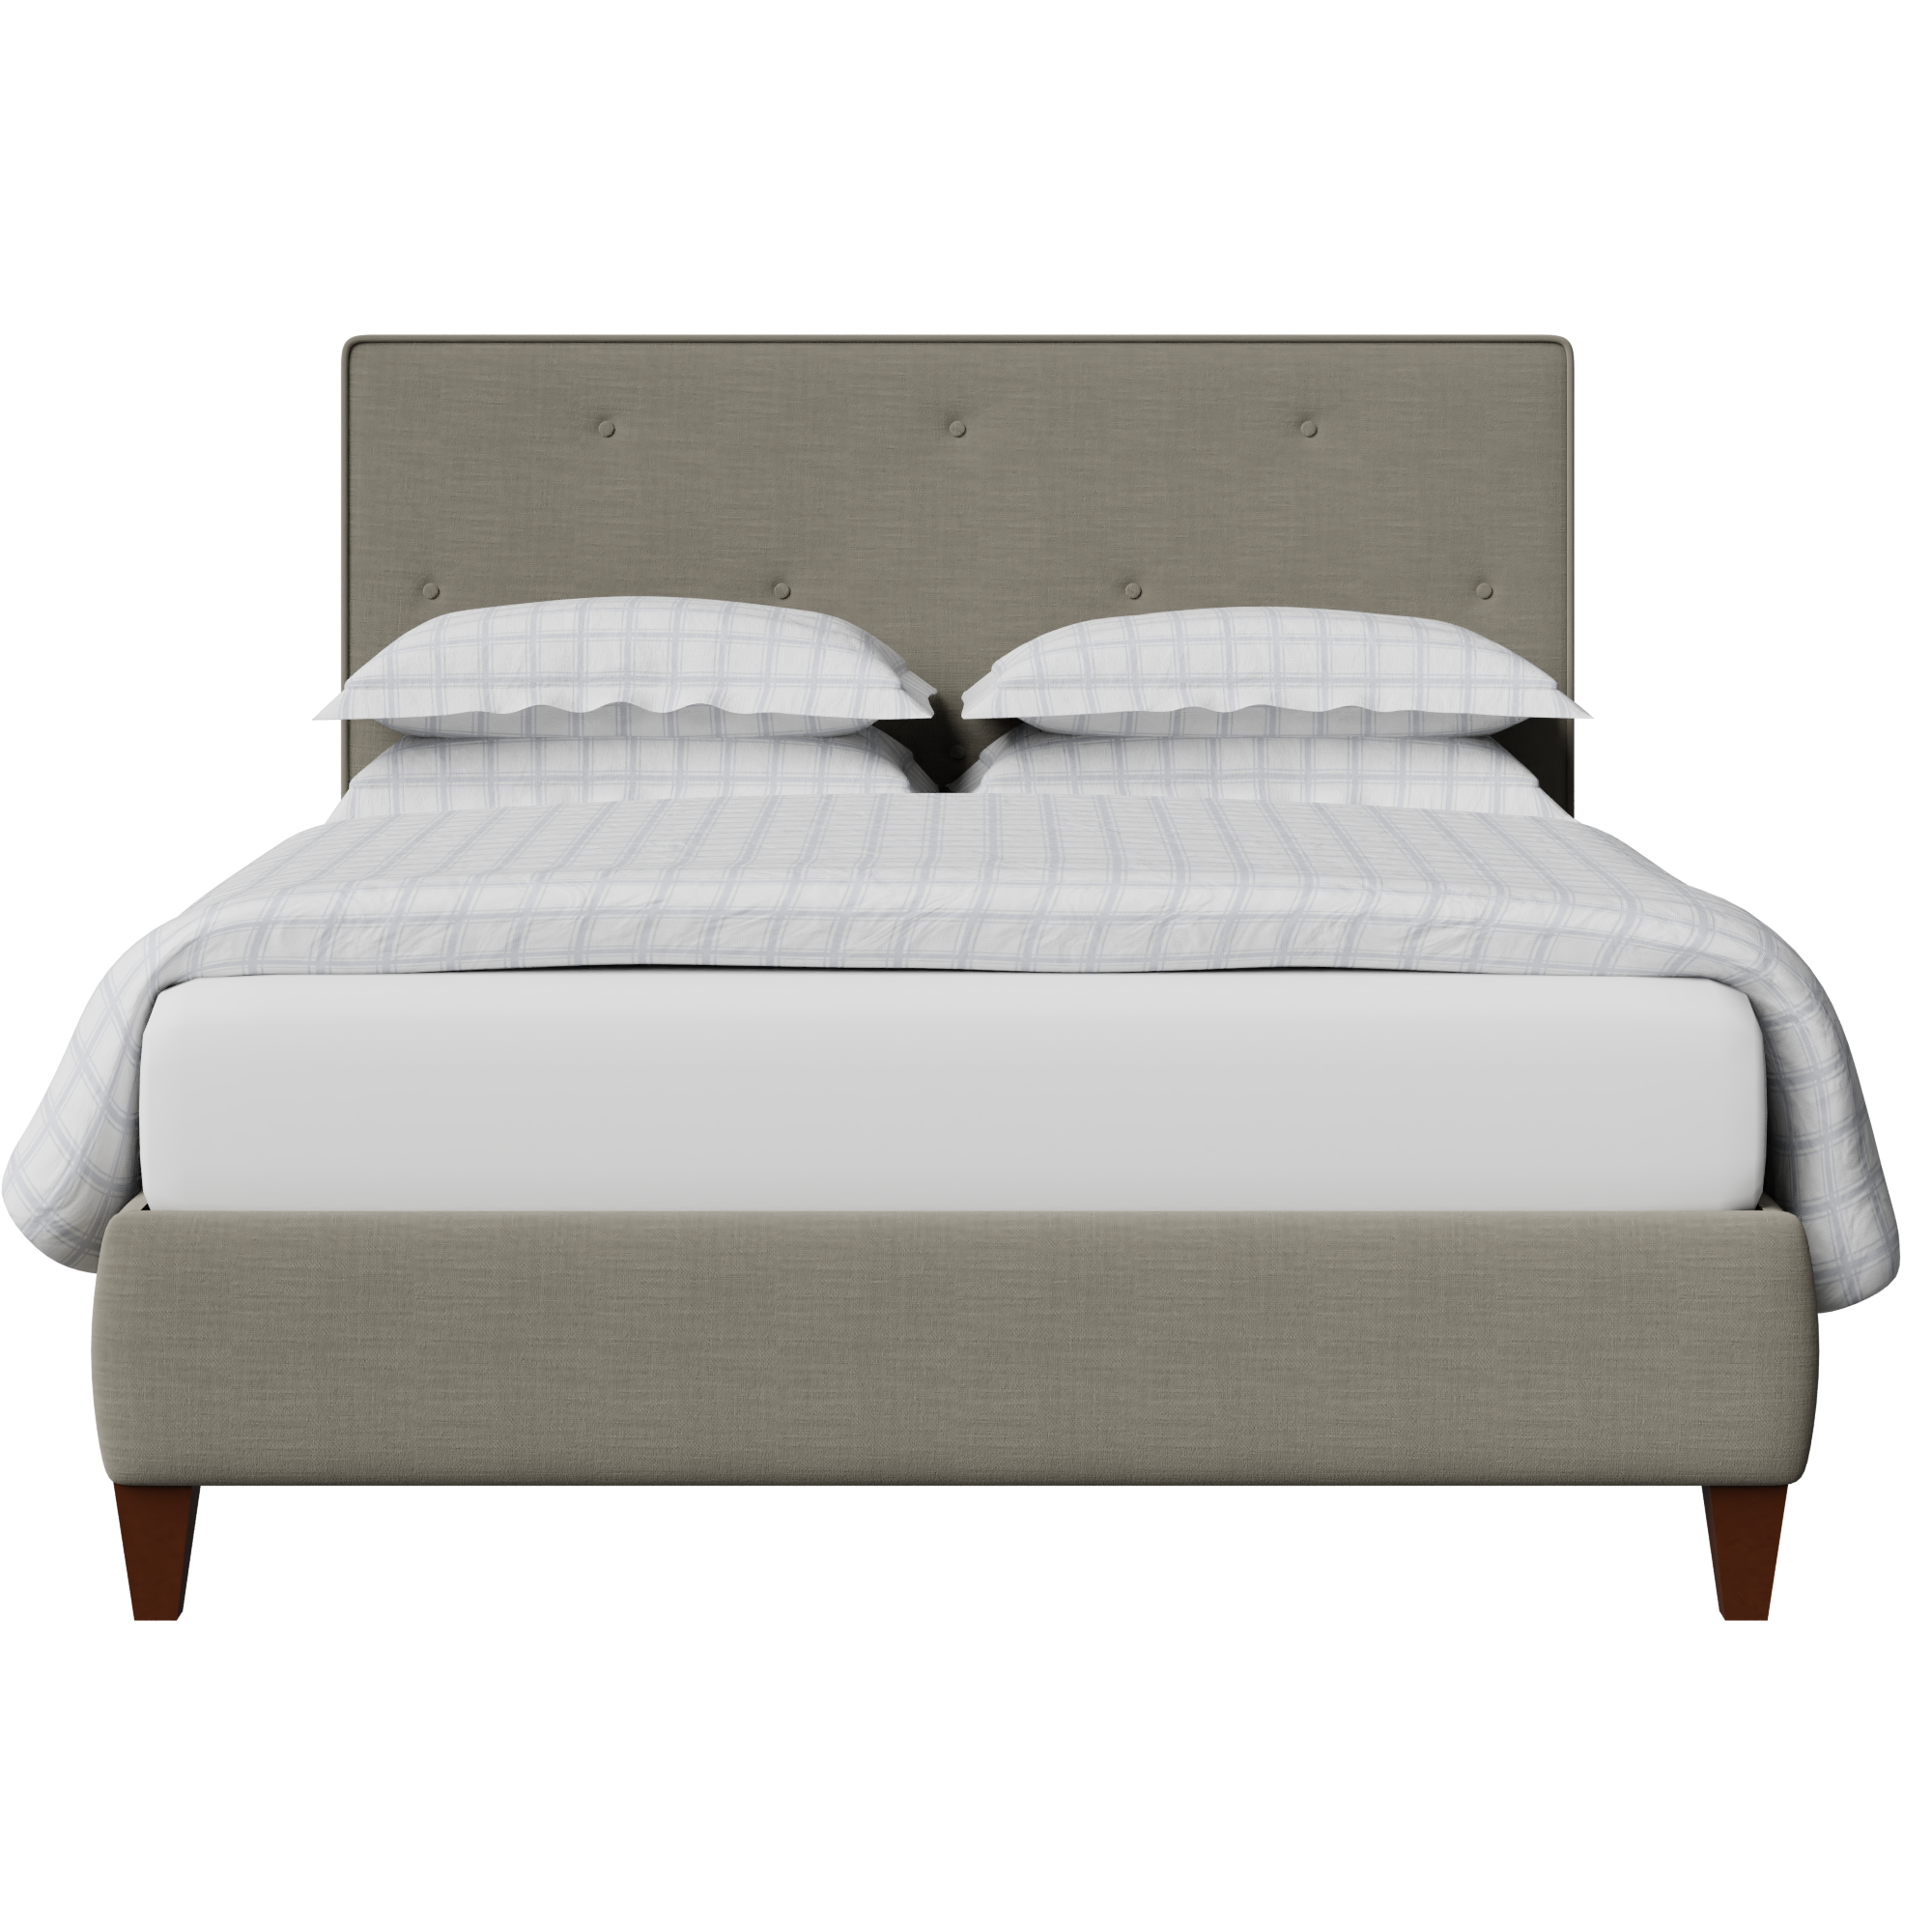 Yushan Buttoned Diagonal stoffen bed in grijs